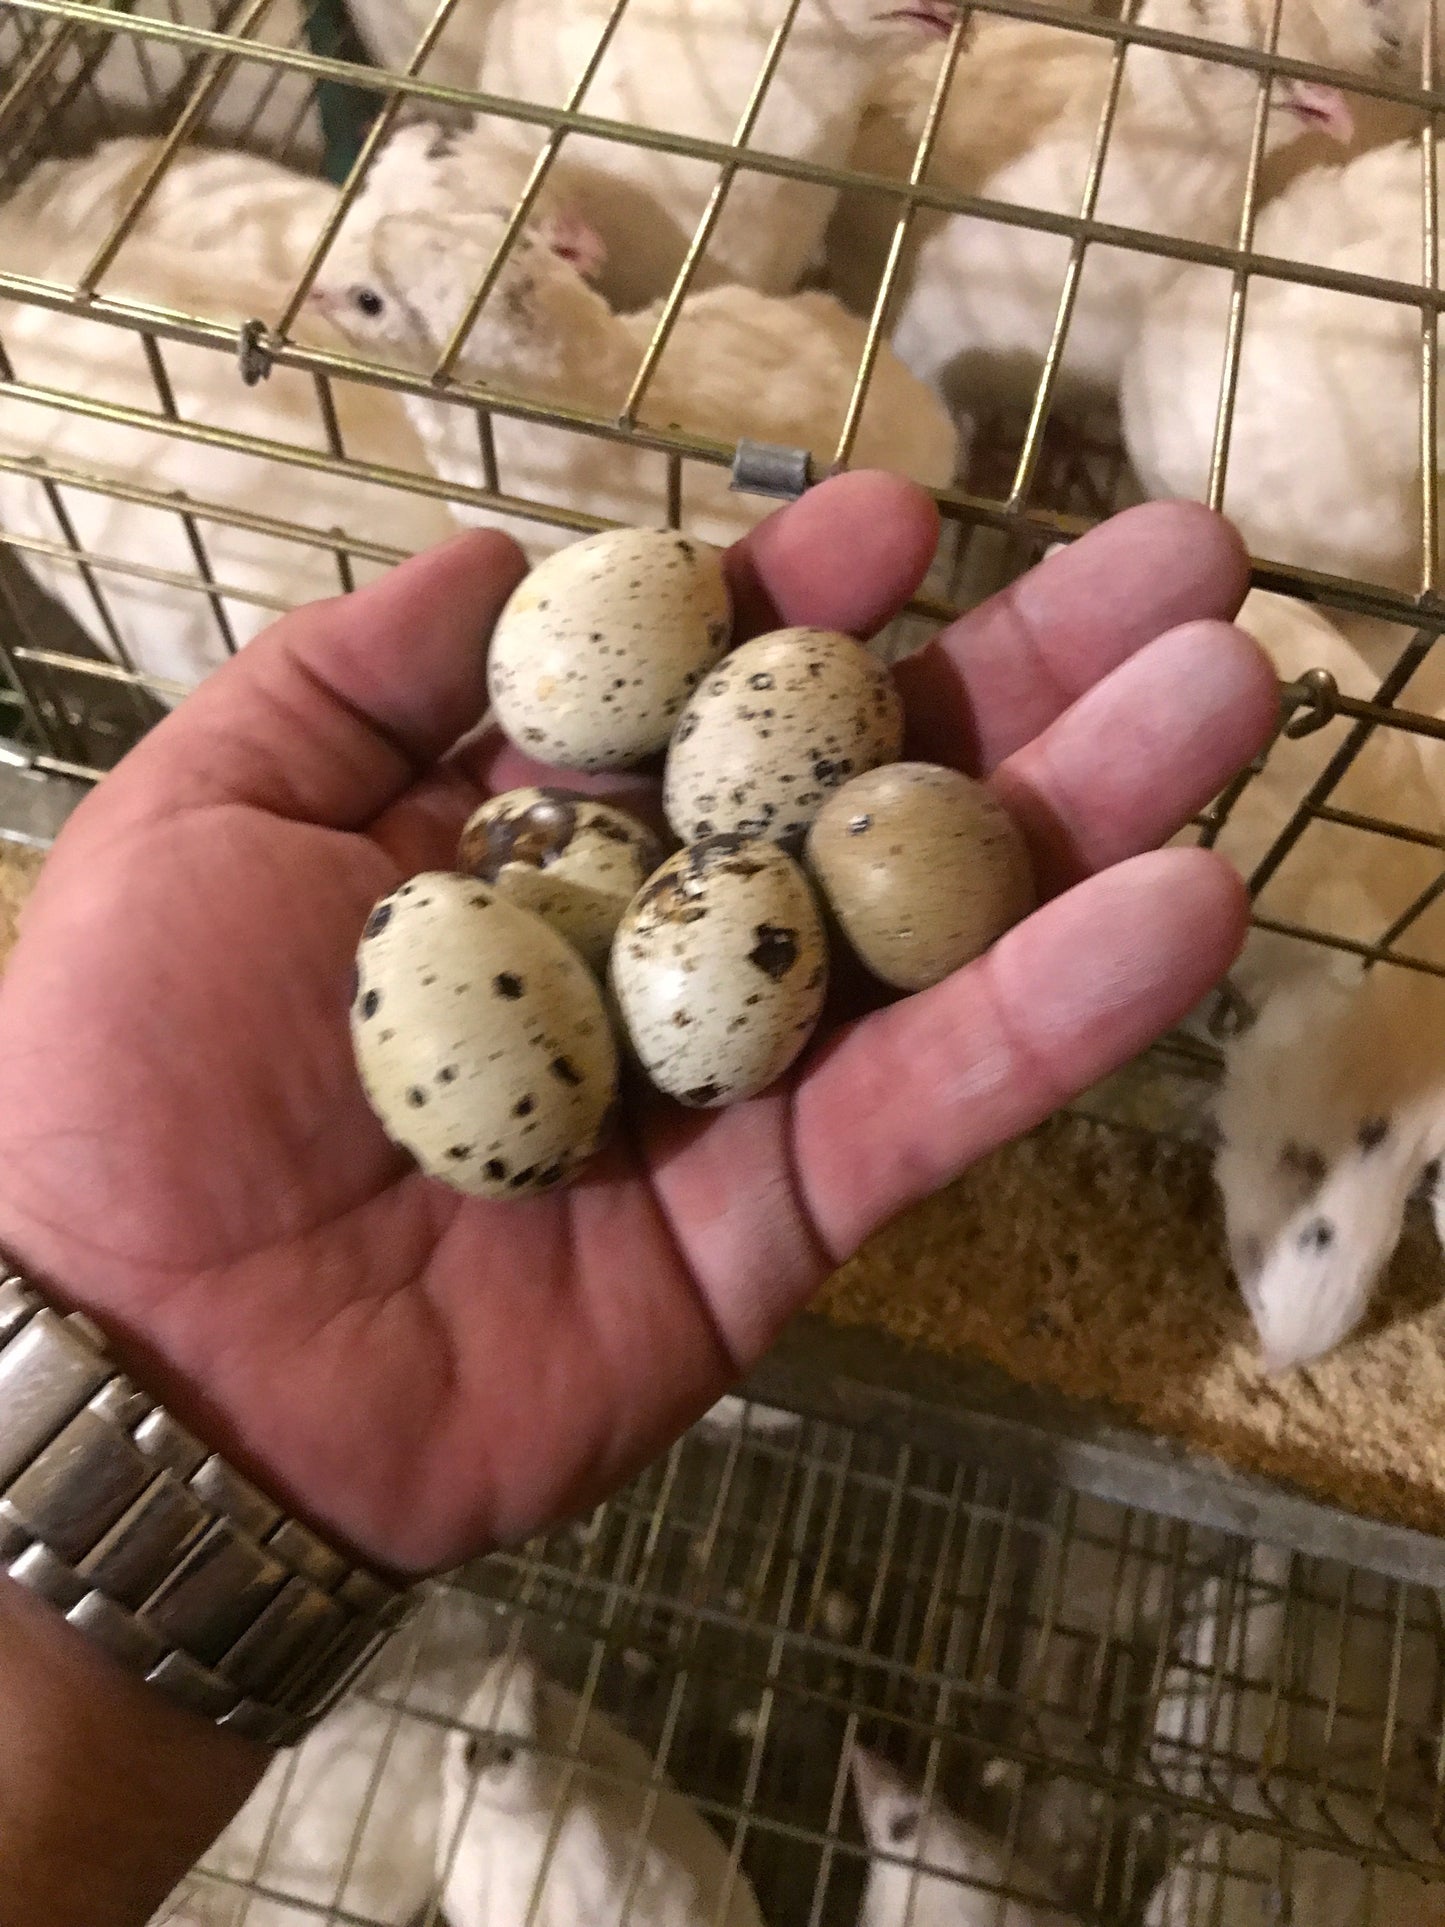 24 Fresh Quail Eggs- for now this product is only available for pick up at the farm.